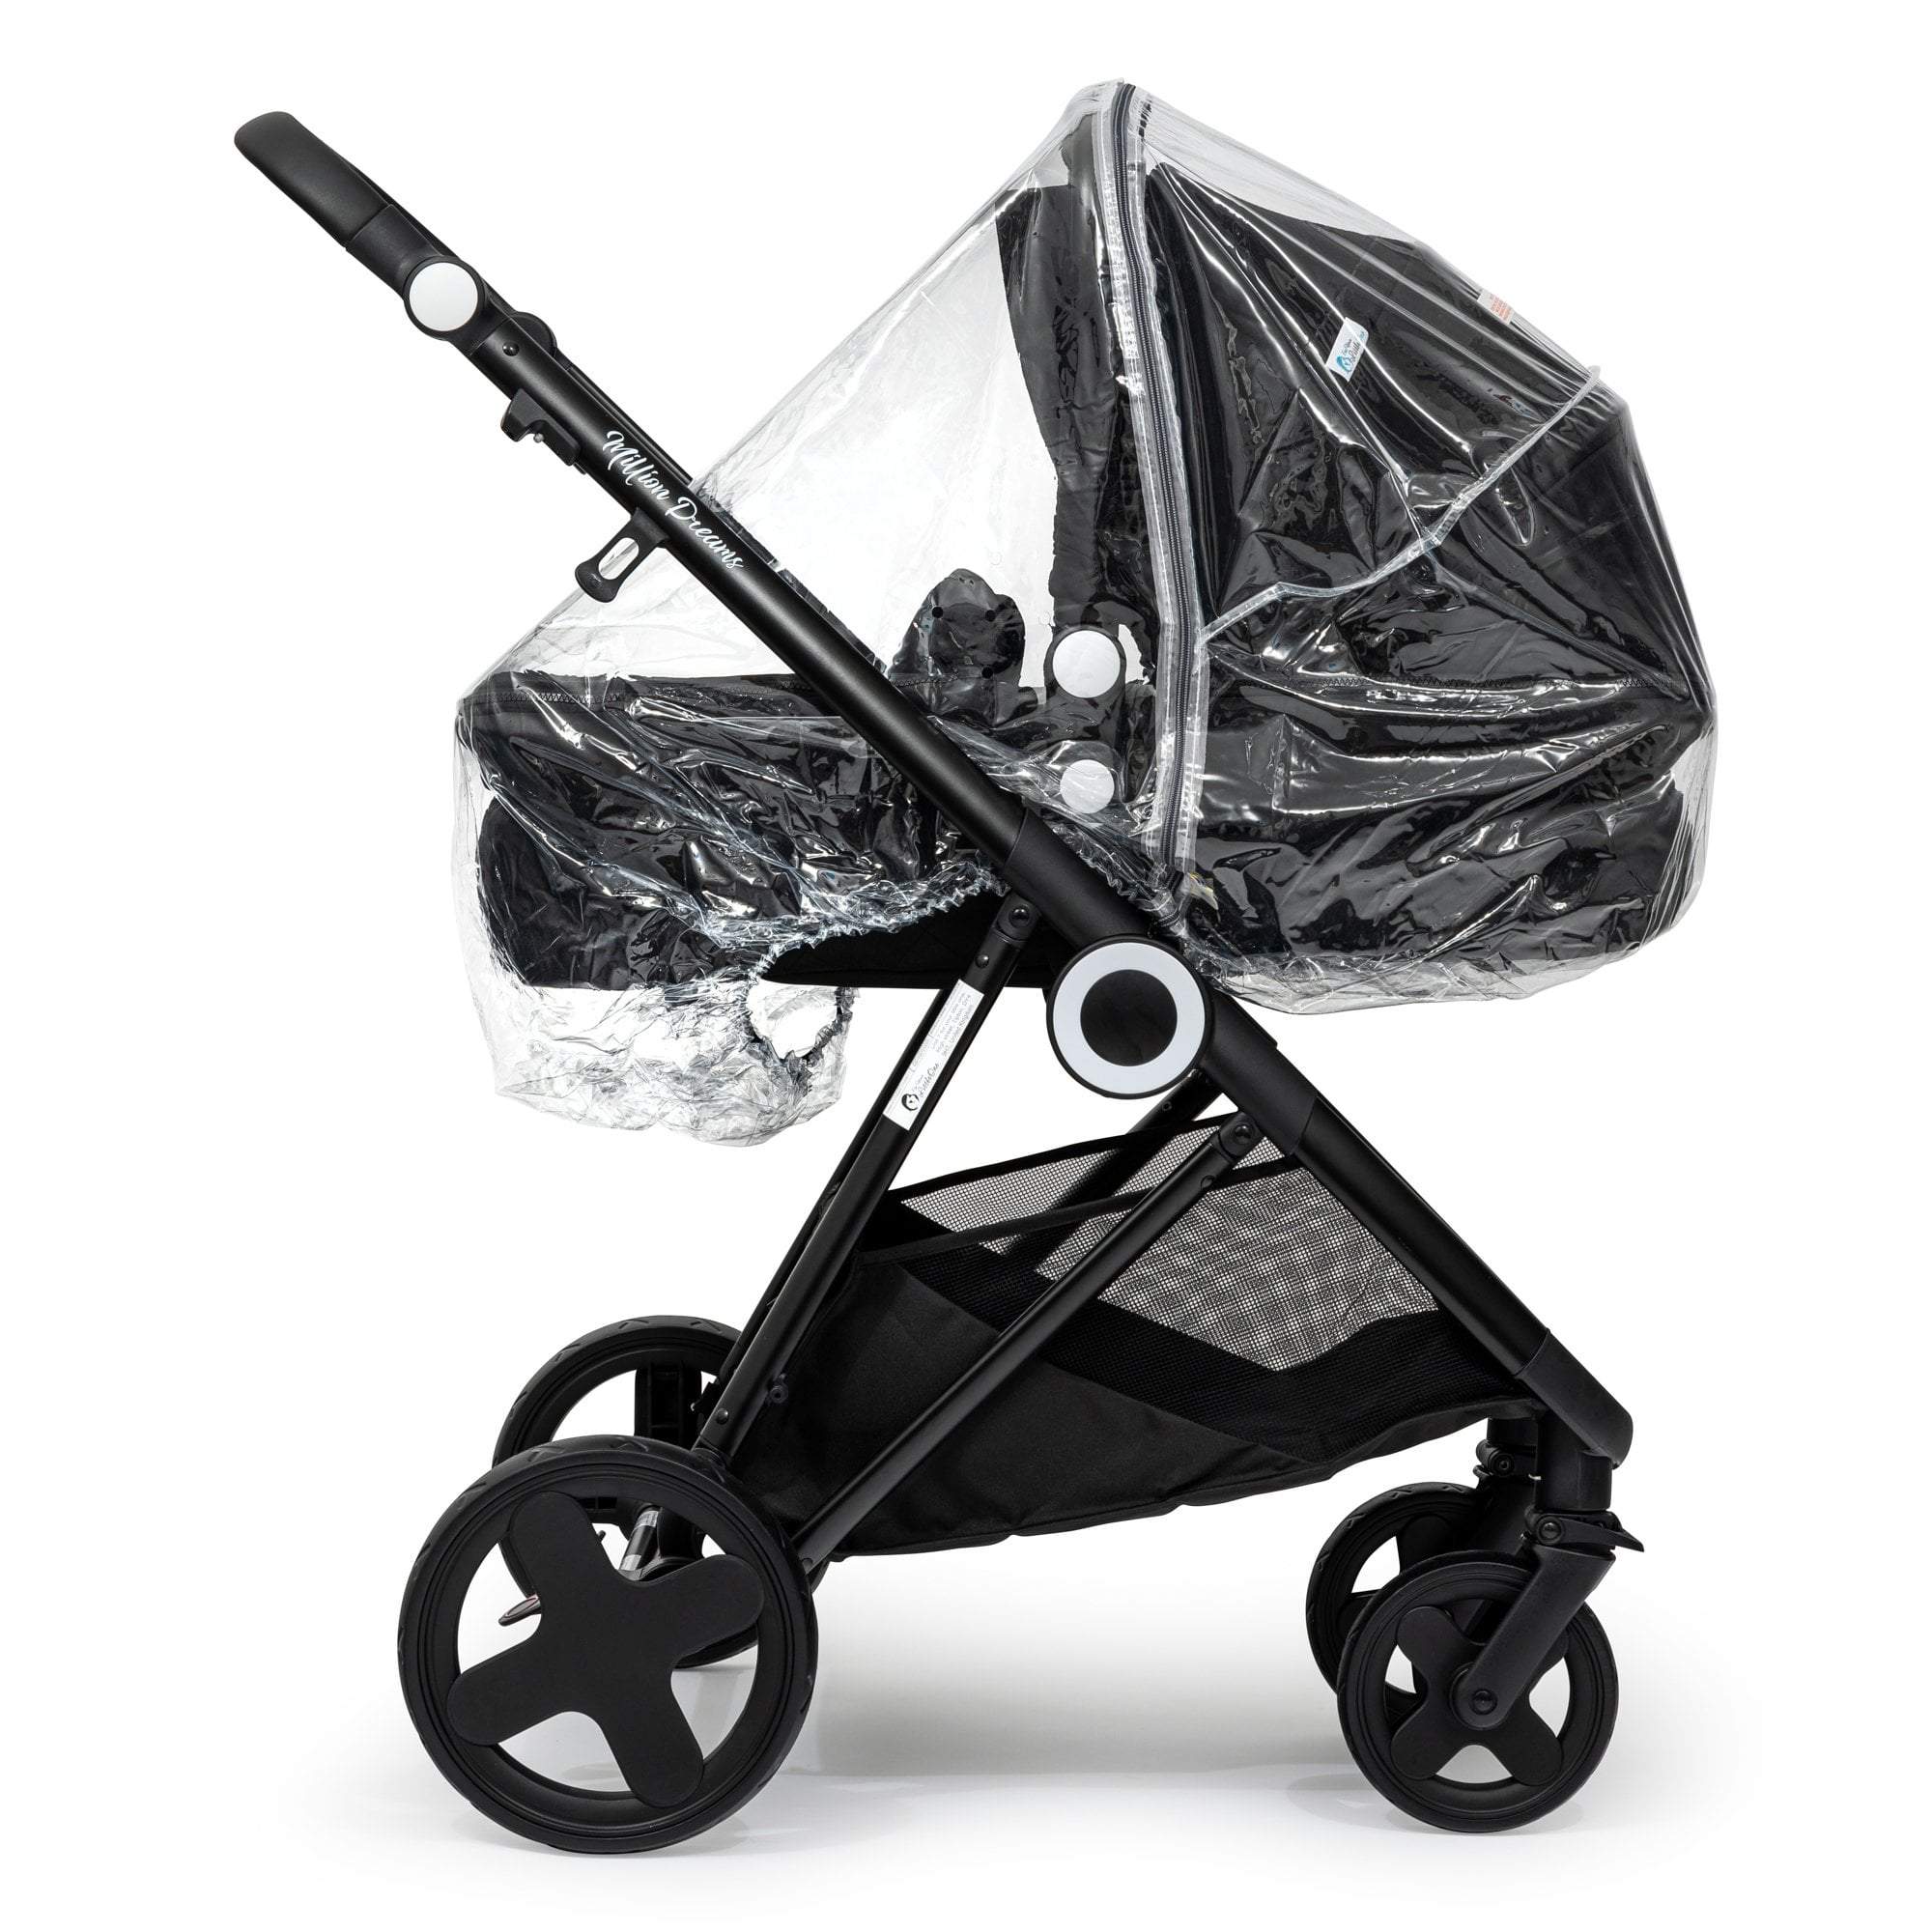 Carrycot Raincover Compatible With Kiddicouture - Fits All Models - For Your Little One